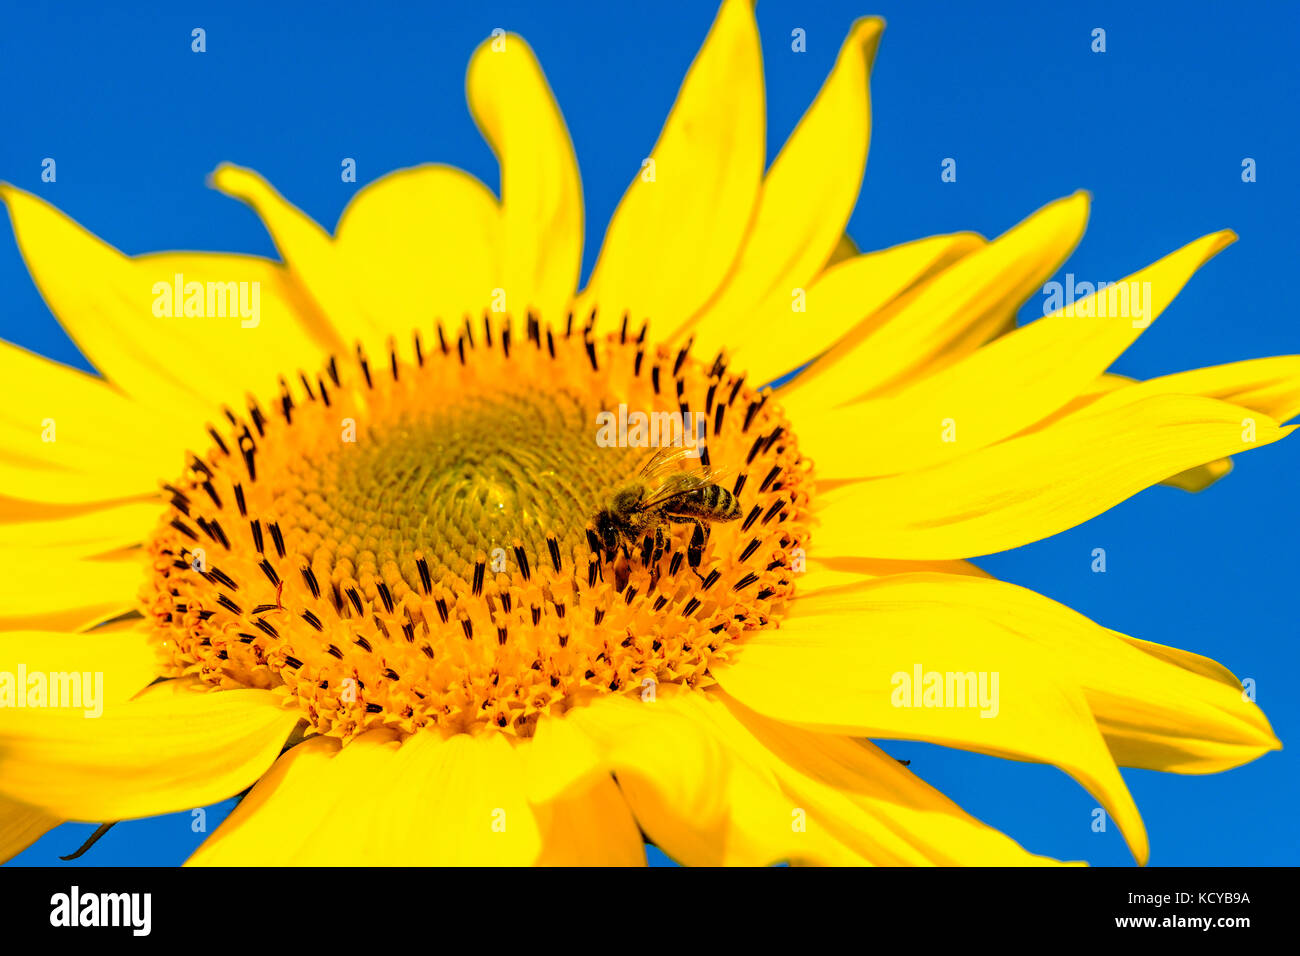 A yellow sunflower (Helianthus annuus) with a honeybee (Apis mellifera carnica) against blue sky Stock Photo